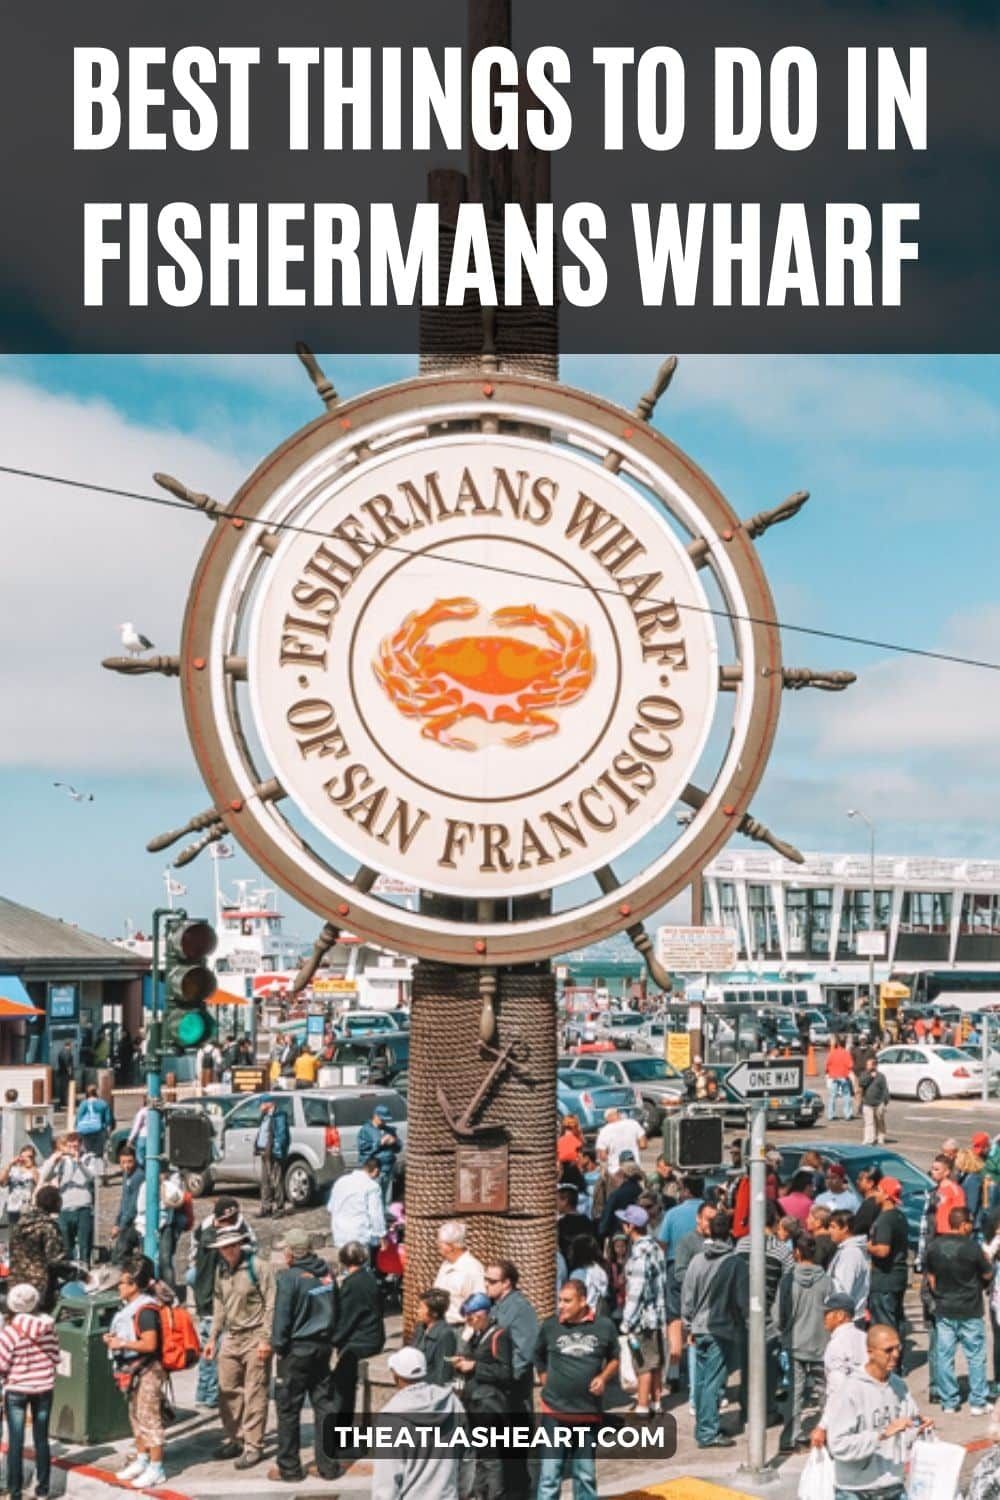 17 Fun & Best Things to do in Fishermans Wharf, San Francisco